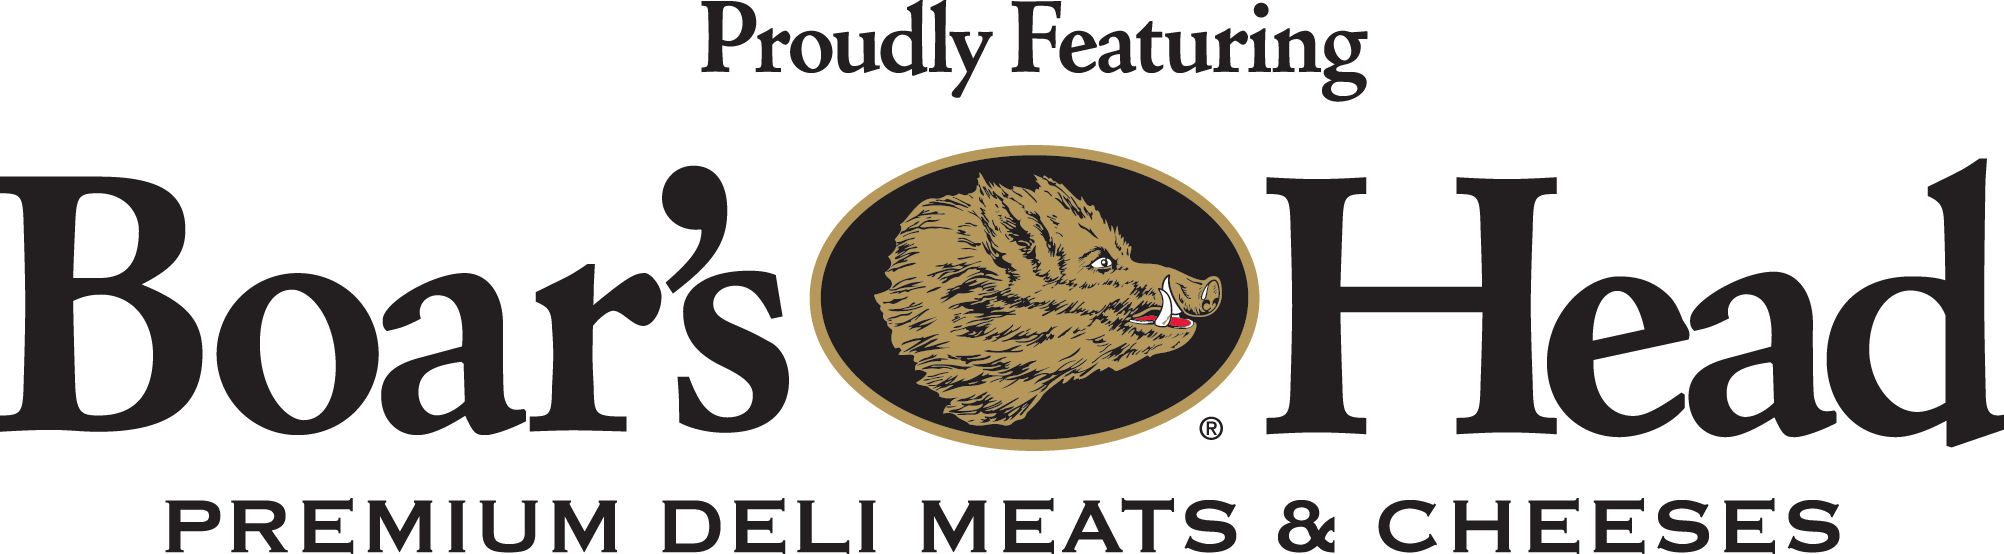 Proudly Featuring Boar's Head Premium Deli Meats & Cheese